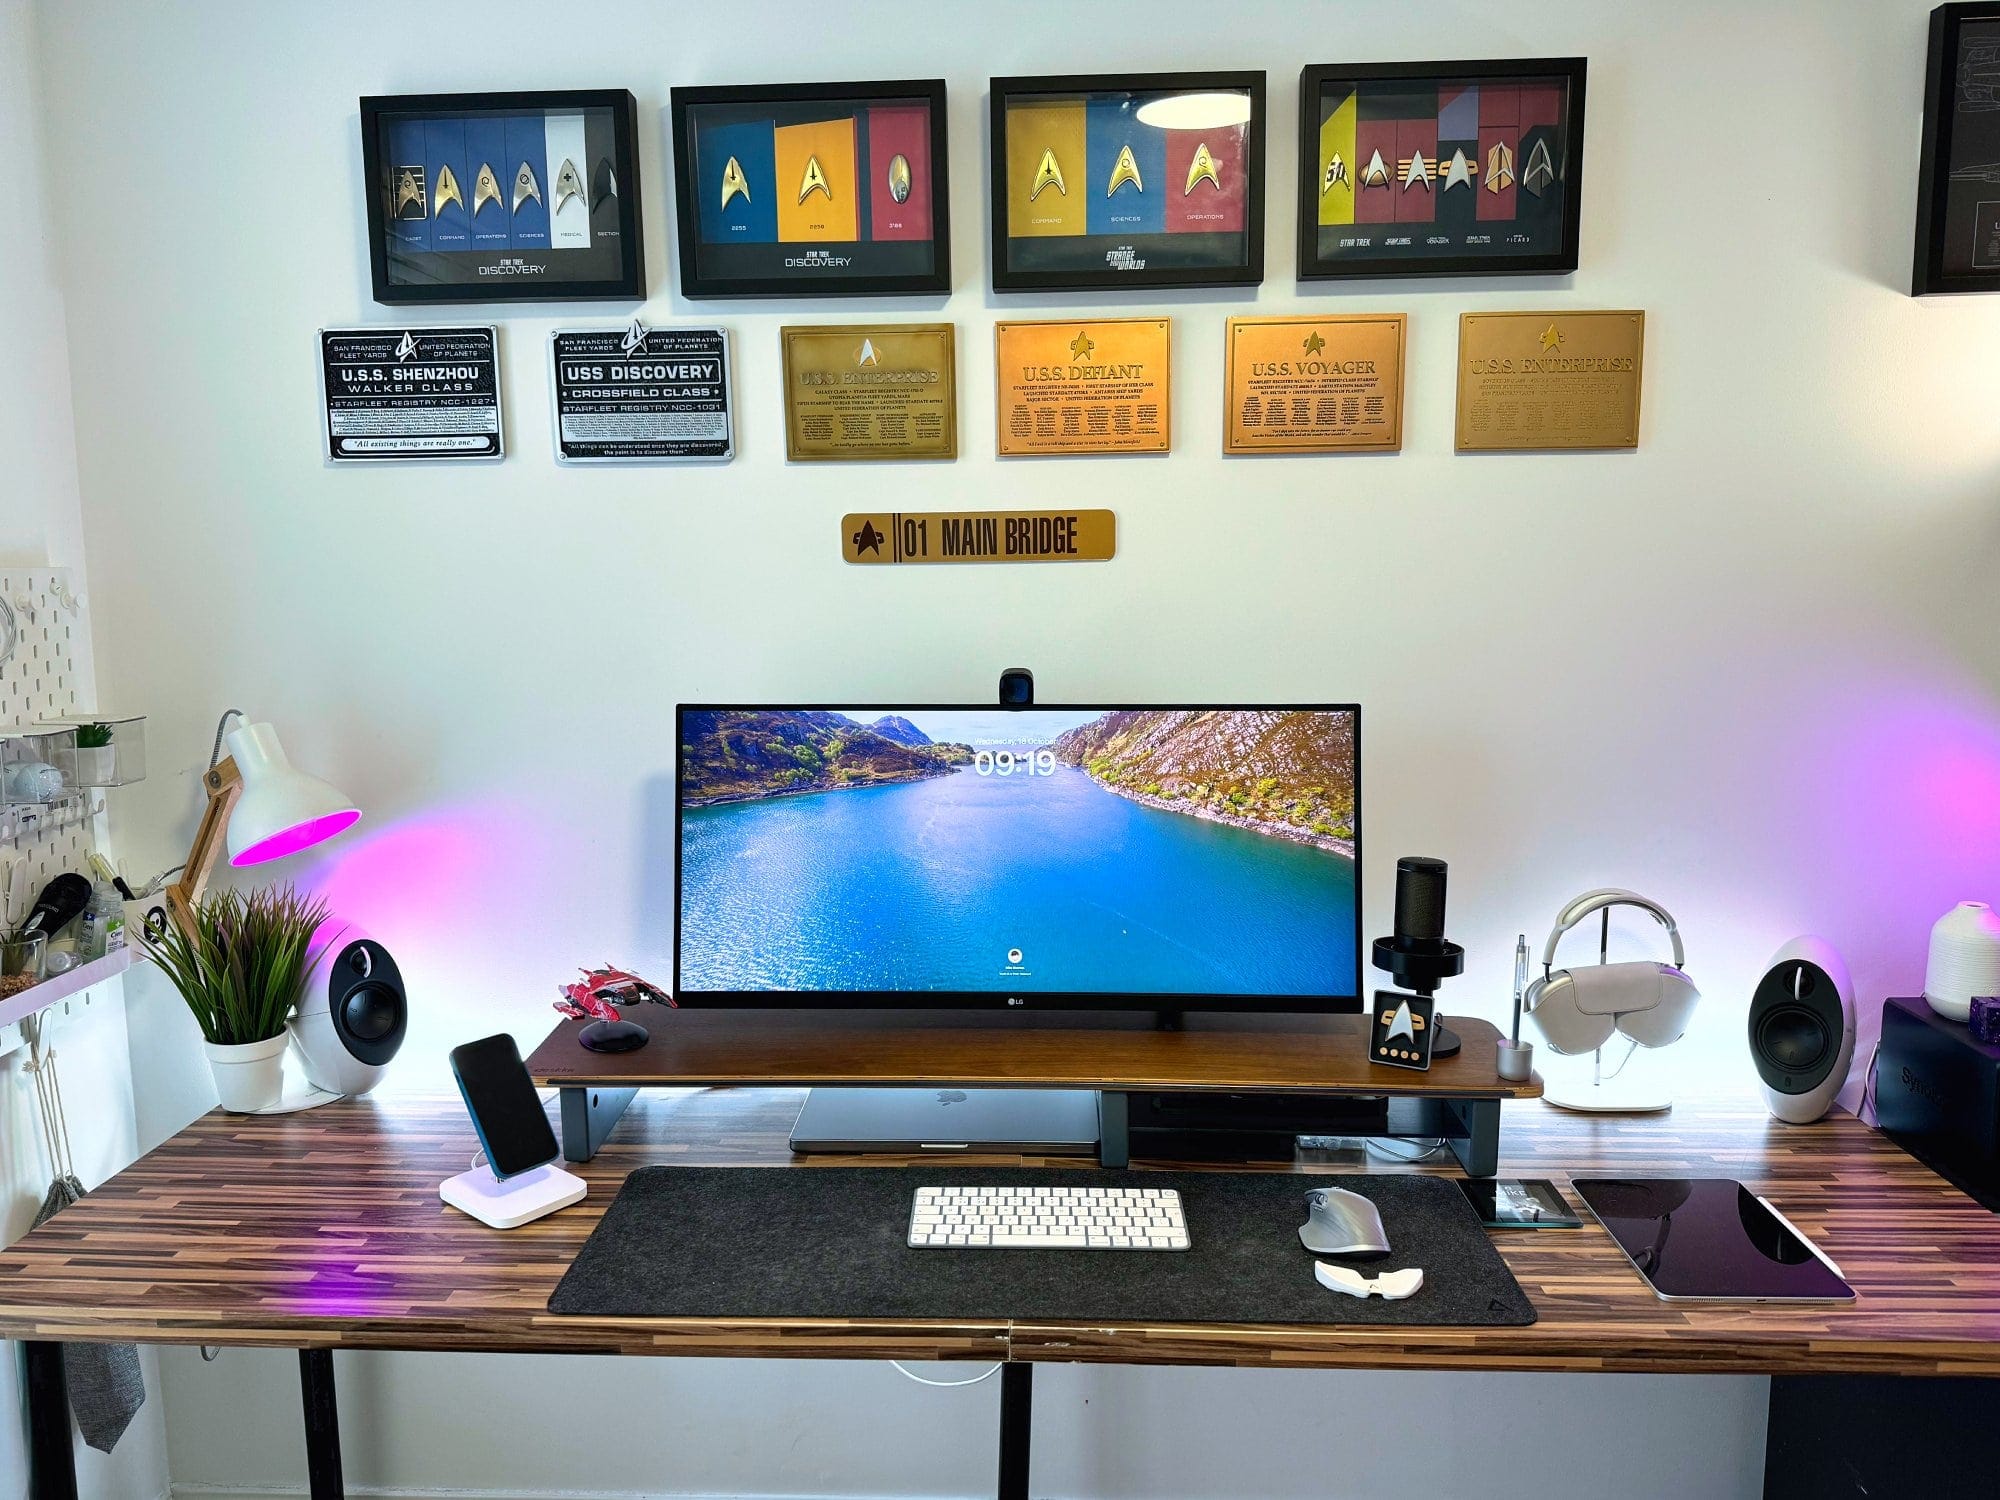 A well-lit home office setup with a wooden desk, a single monitor, ambient lighting, and a wall adorned with framed Star Trek insignia and plaques